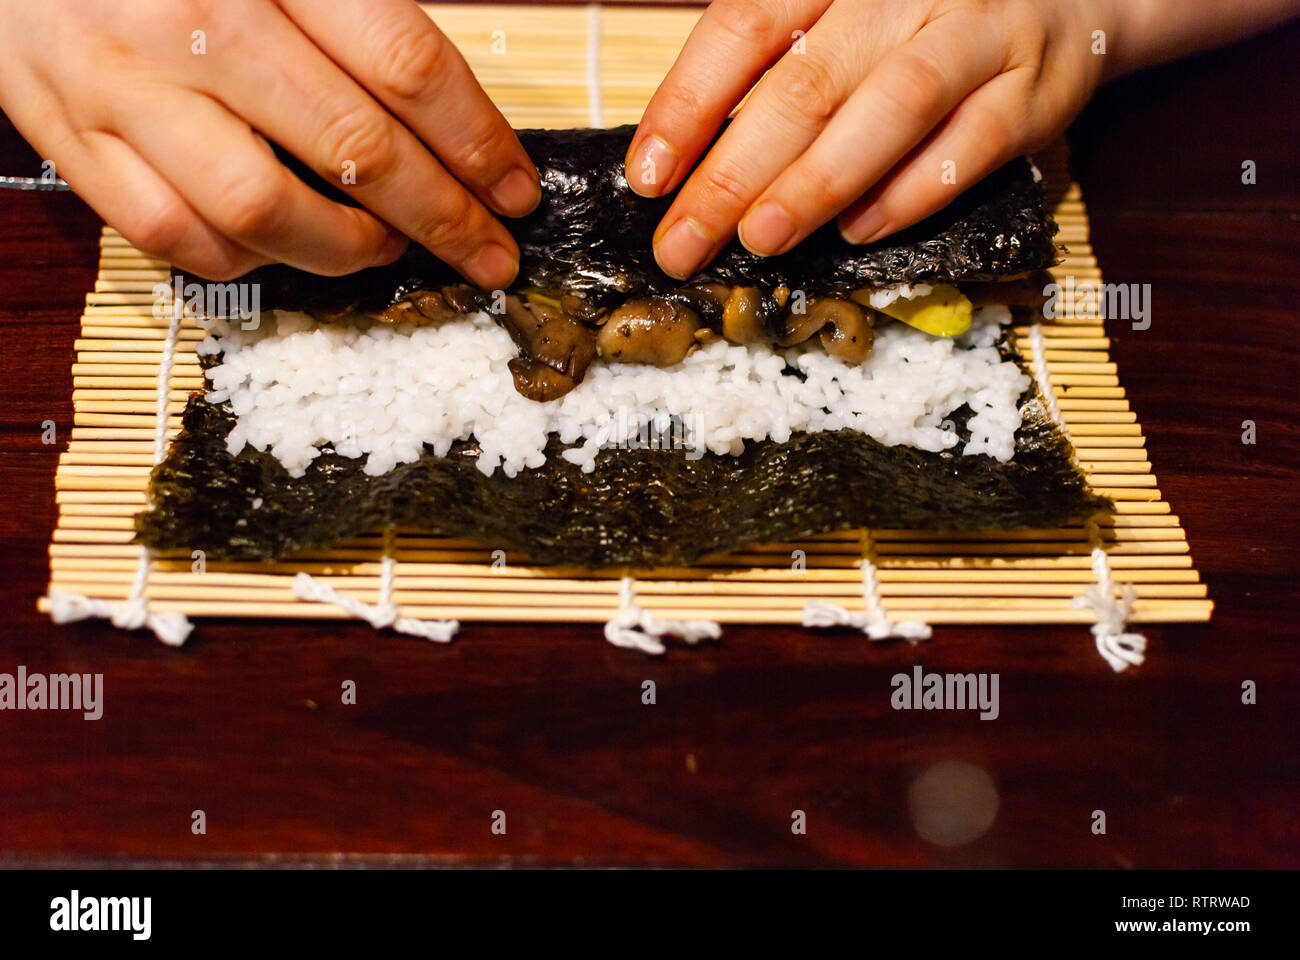 https://c8.alamy.com/comp/RTRWAD/side-view-of-a-young-women-rolling-homemade-vegan-sushi-on-a-wooden-table-RTRWAD.jpg